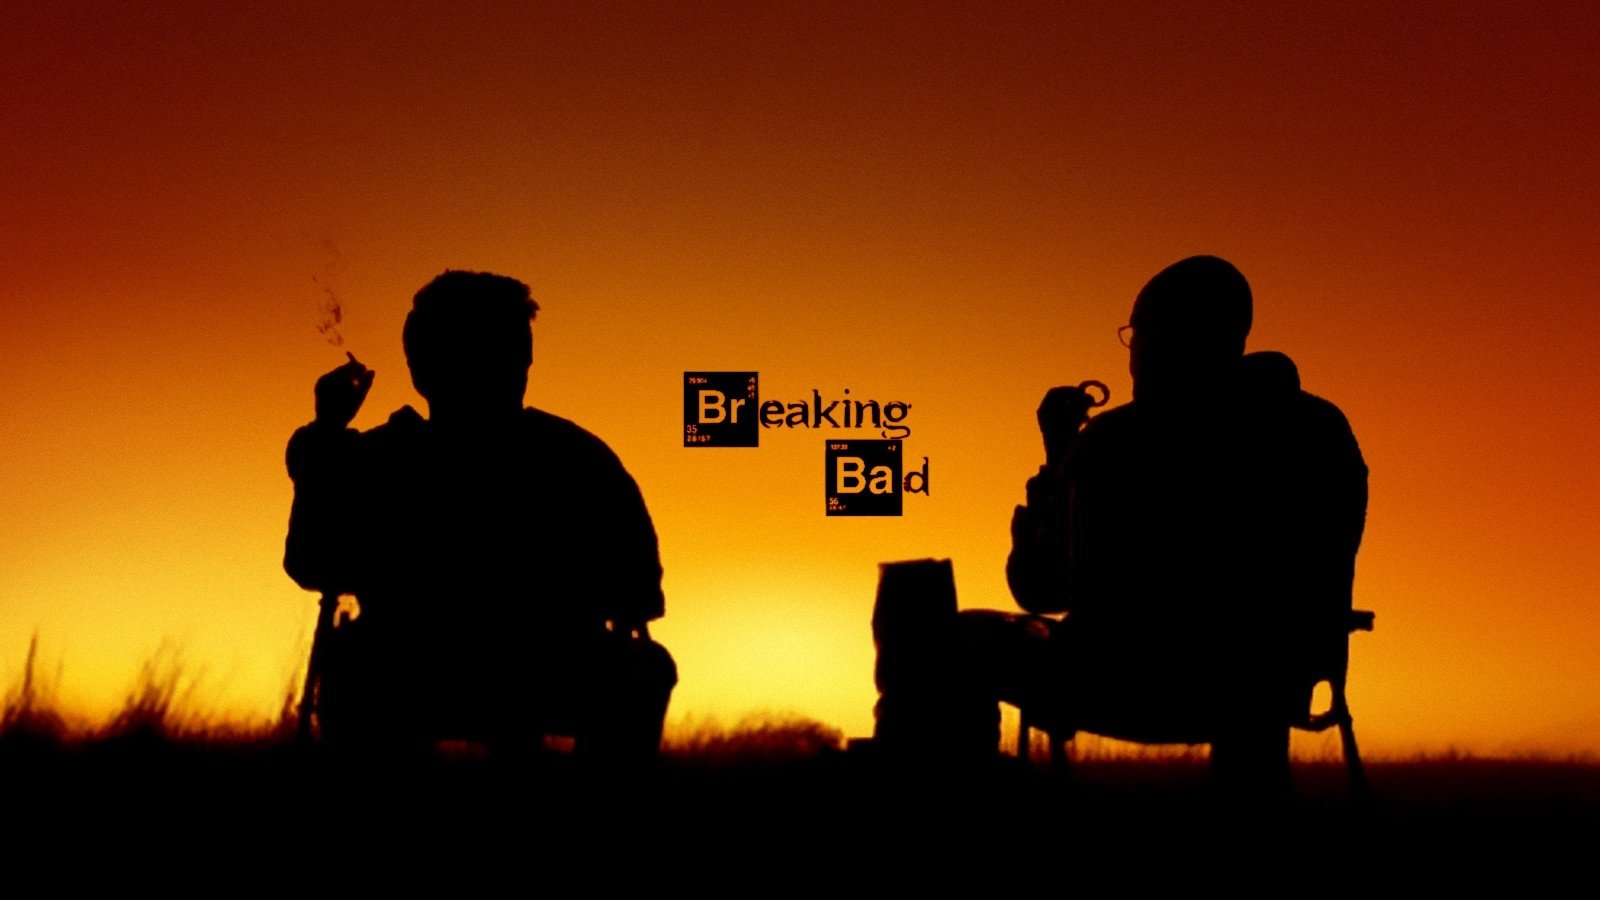 Breaking Bad Wallpaper and Background 1600x900 ID698914 1600x900